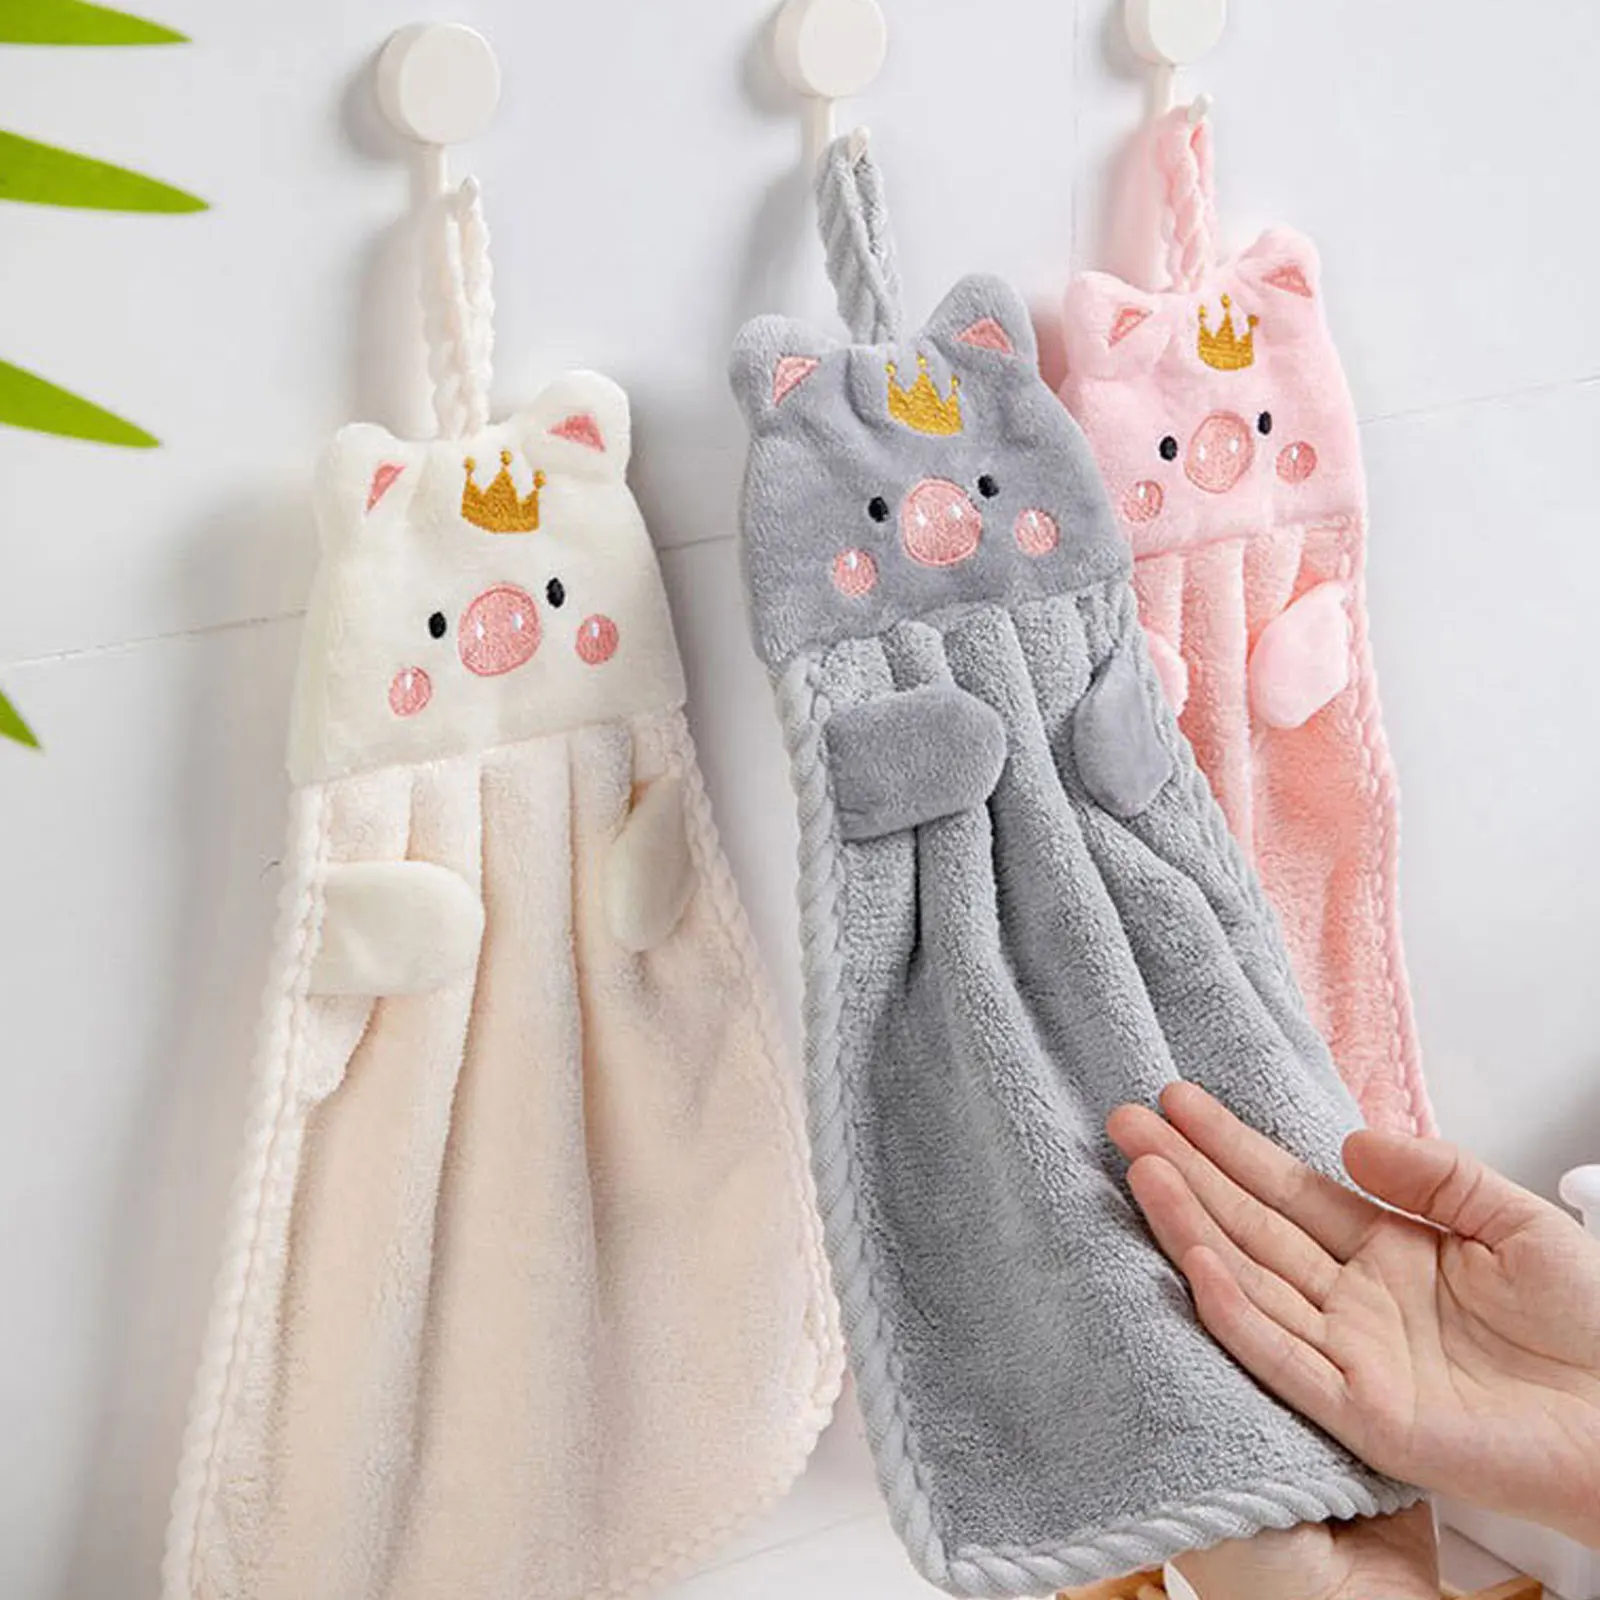 

Cute Pig Hand Towel Household Coral Velvet Terry Towels For Bathroom Kitchen Soft Hanging Loops Quick Dry Absorbent Cloths Towel